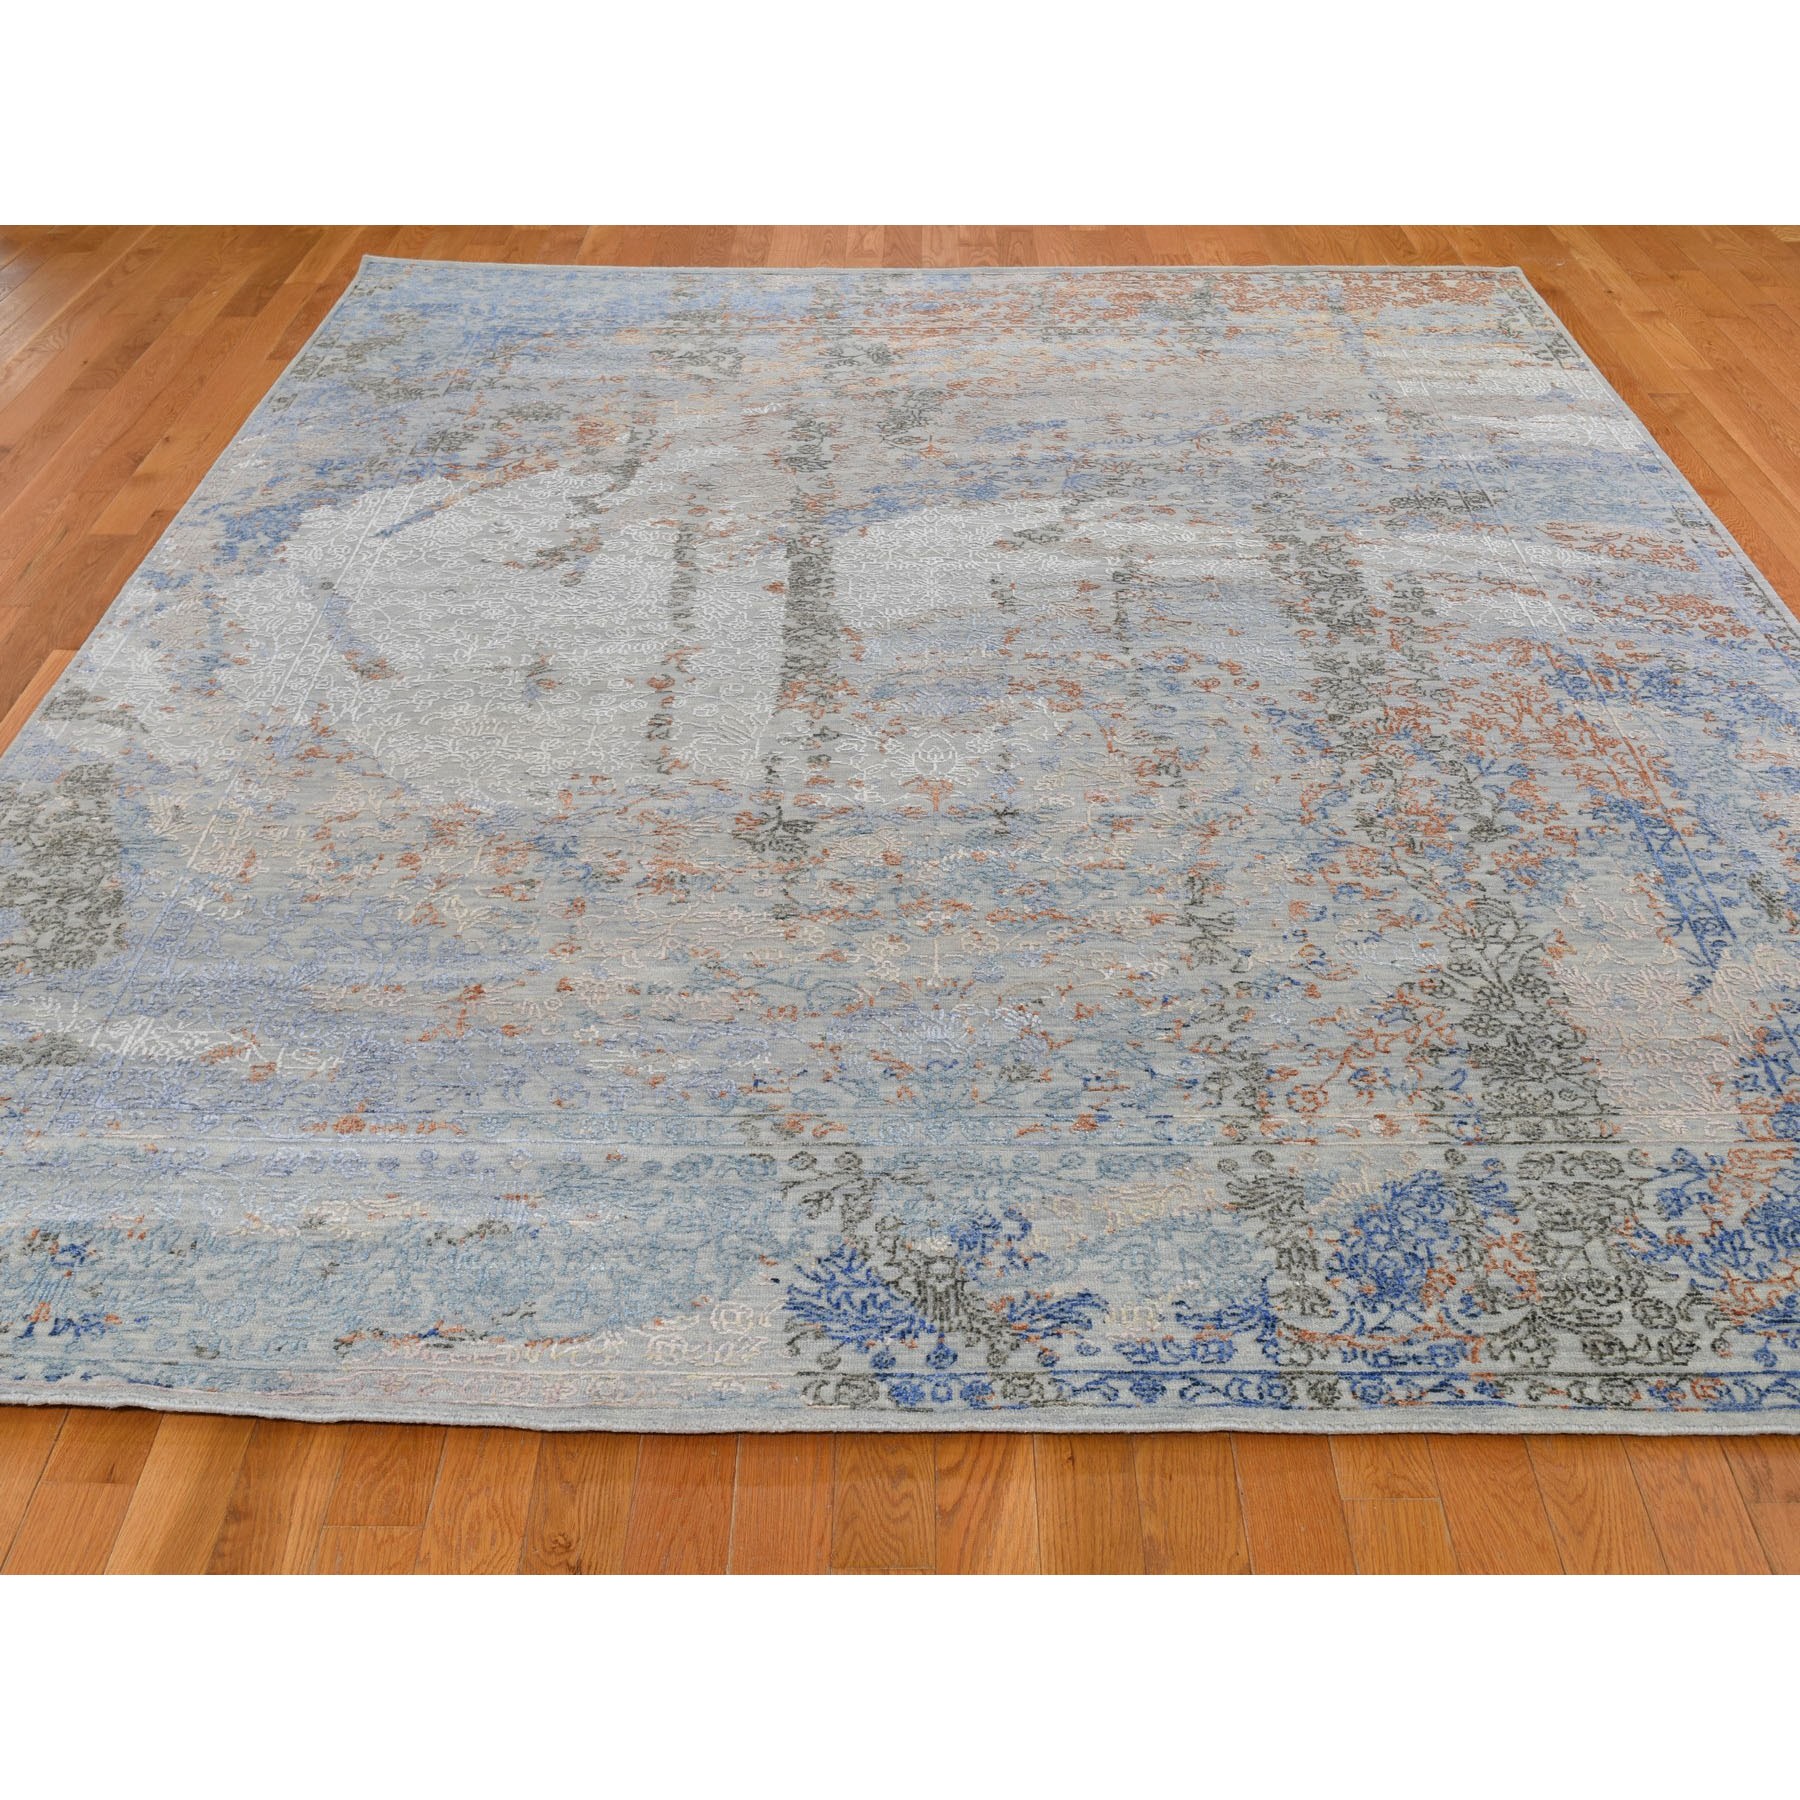 8-1 x9-10  Transitional Erased Floral Design Wool And Silk Hand Knotted Oriental Rug 